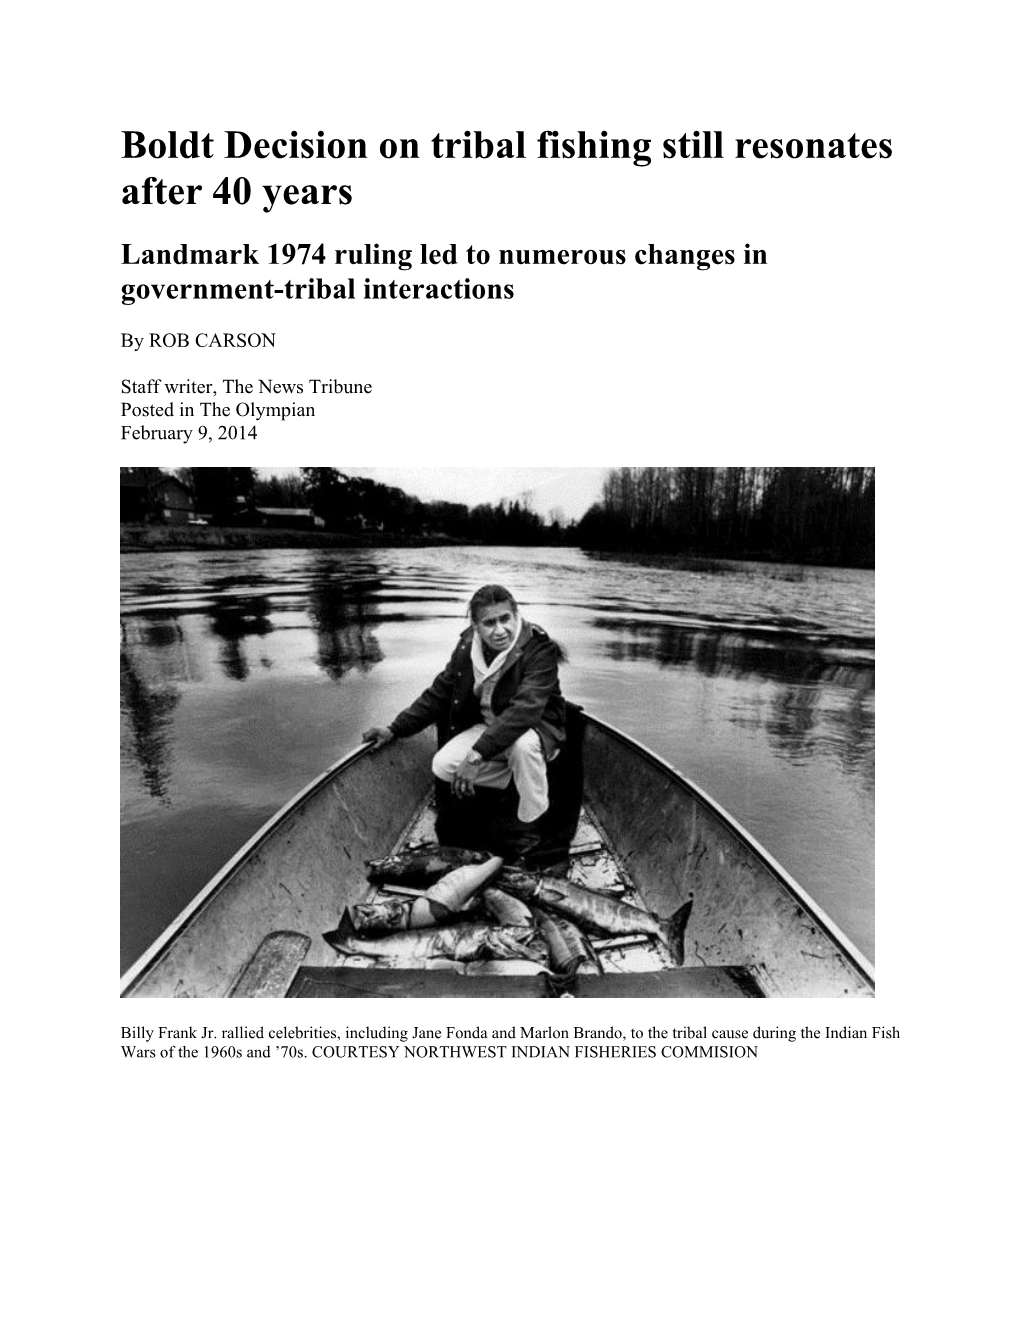 Boldt Decision on Tribal Fishing Still Resonates After 40 Years Landmark 1974 Ruling Led to Numerous Changes in Government-Tribal Interactions